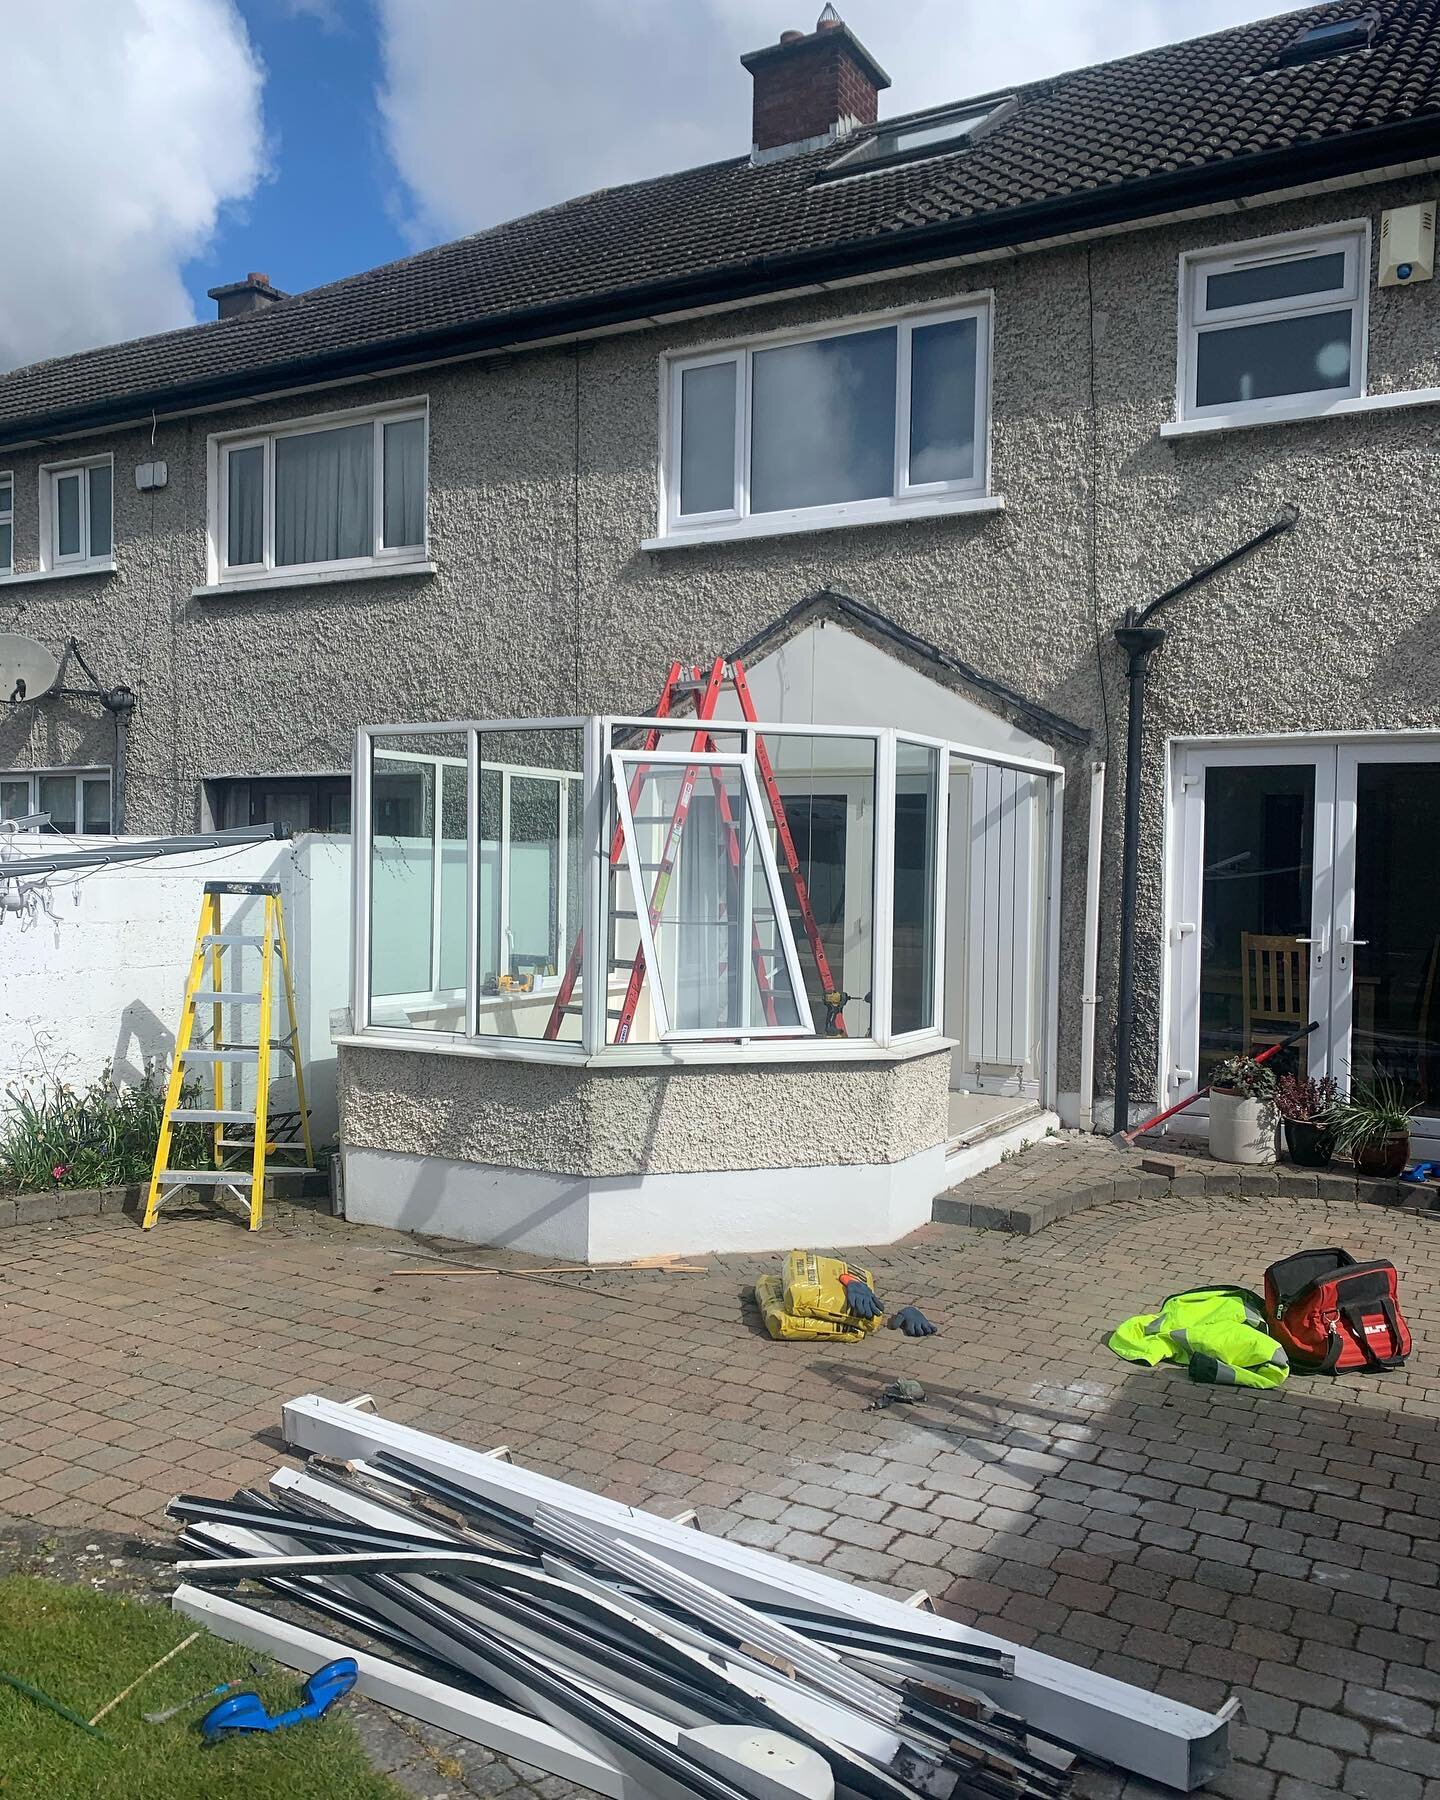 Beginning of our project in Castleknock. 

Demolition of existing structure to allow for reconstruction of larger, brighter, more modern conservatory. 
Completion of form work base to allow for glass sliding doors and glue-laminated structural timber